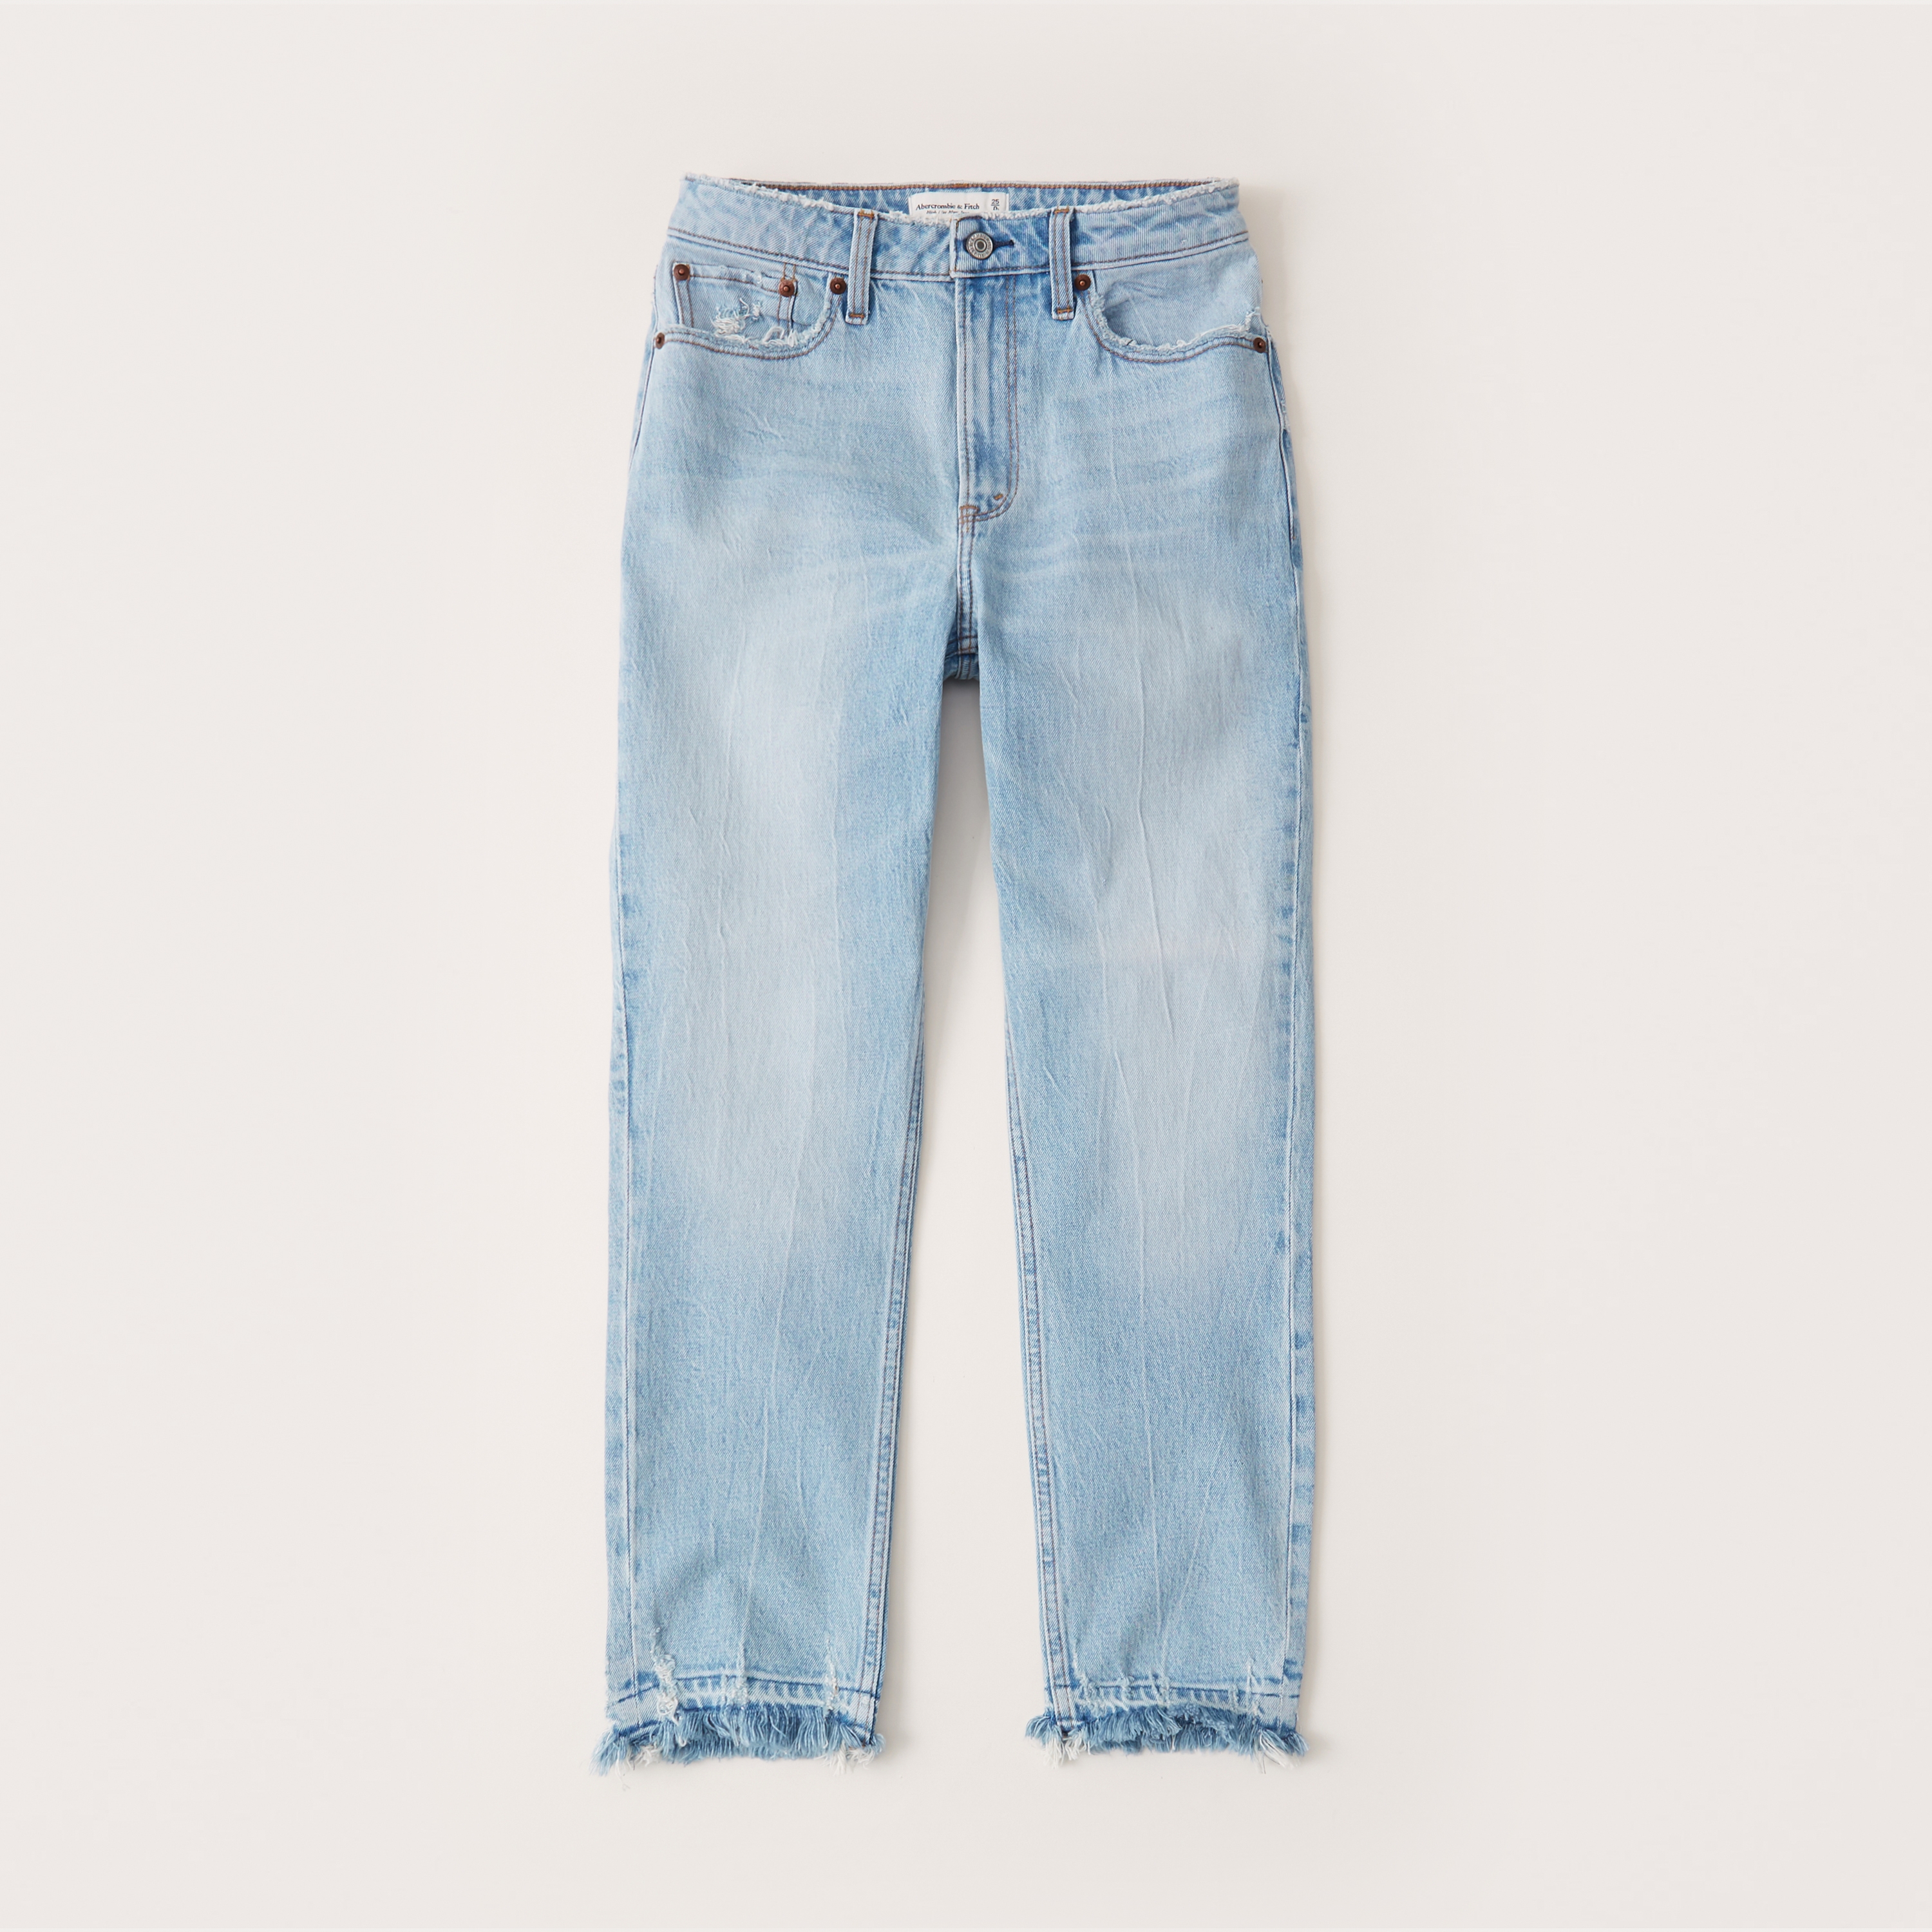 abercrombie & fitch curve love mom jeans